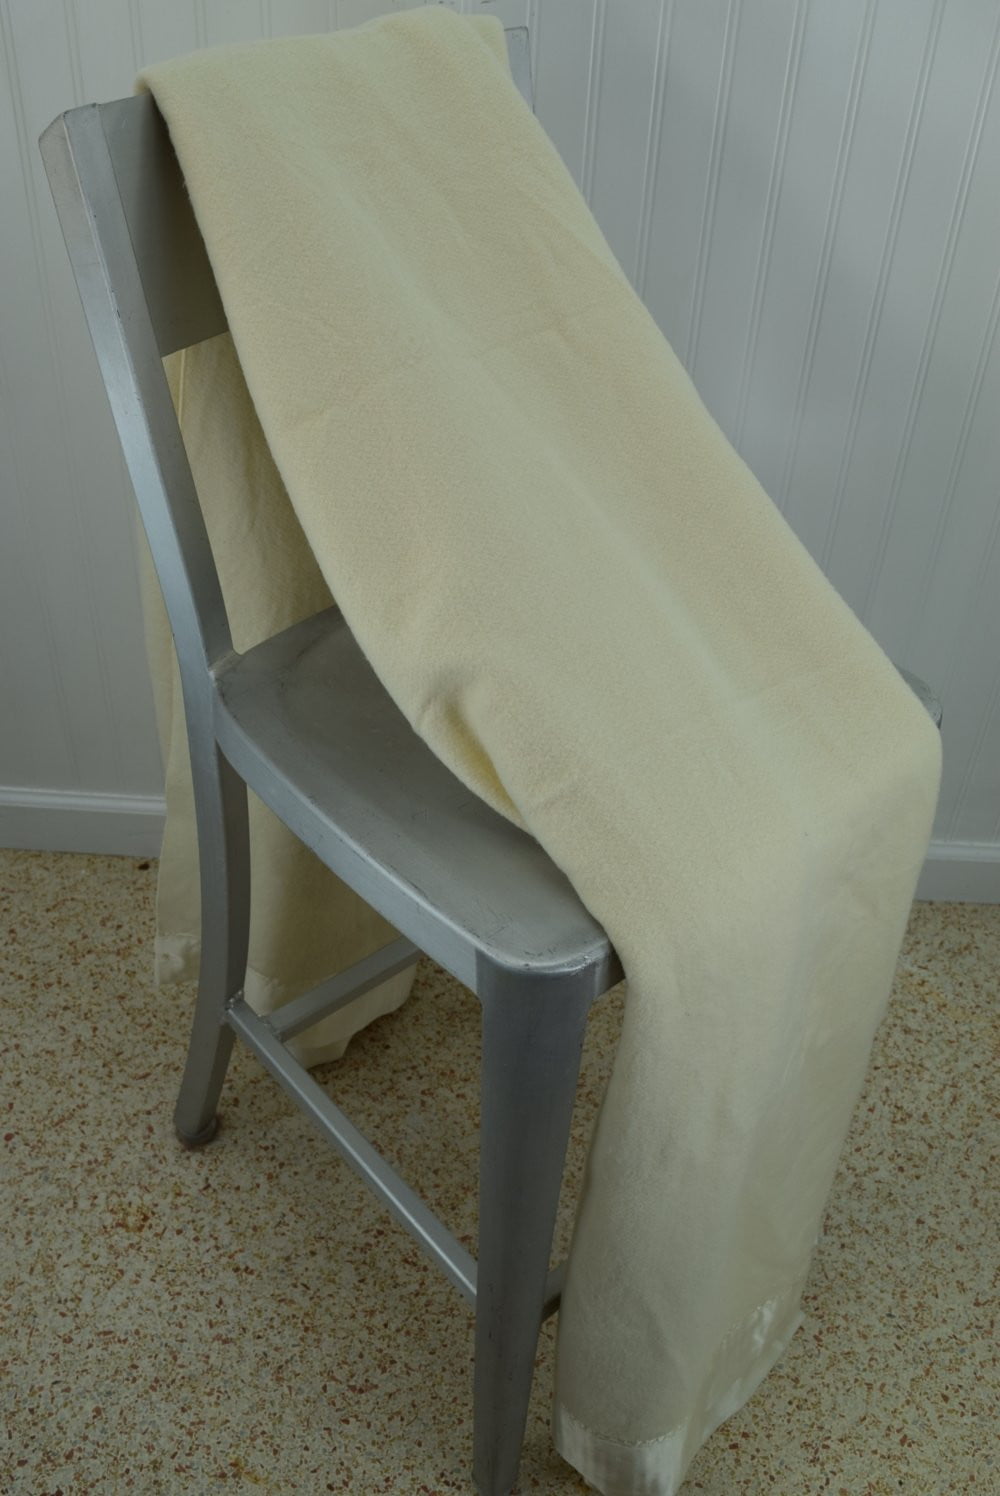 Acrylic 100% Blanket for sale Ivory Off White USA Made 65" X 84" cream